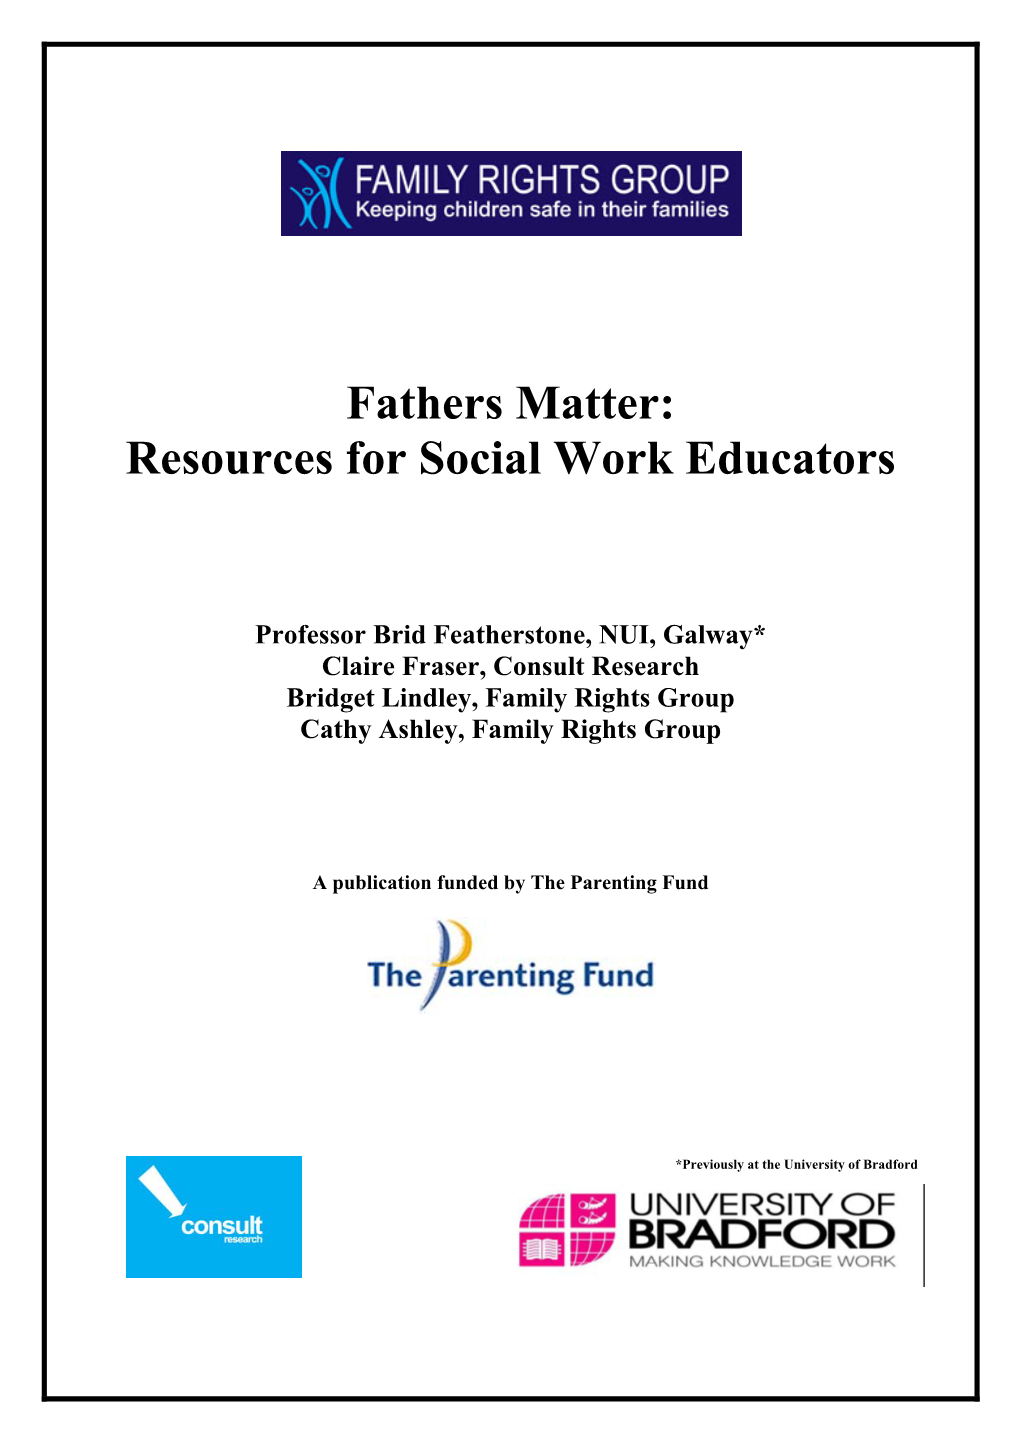 Fathers Matter: Resources for Social Work Educators